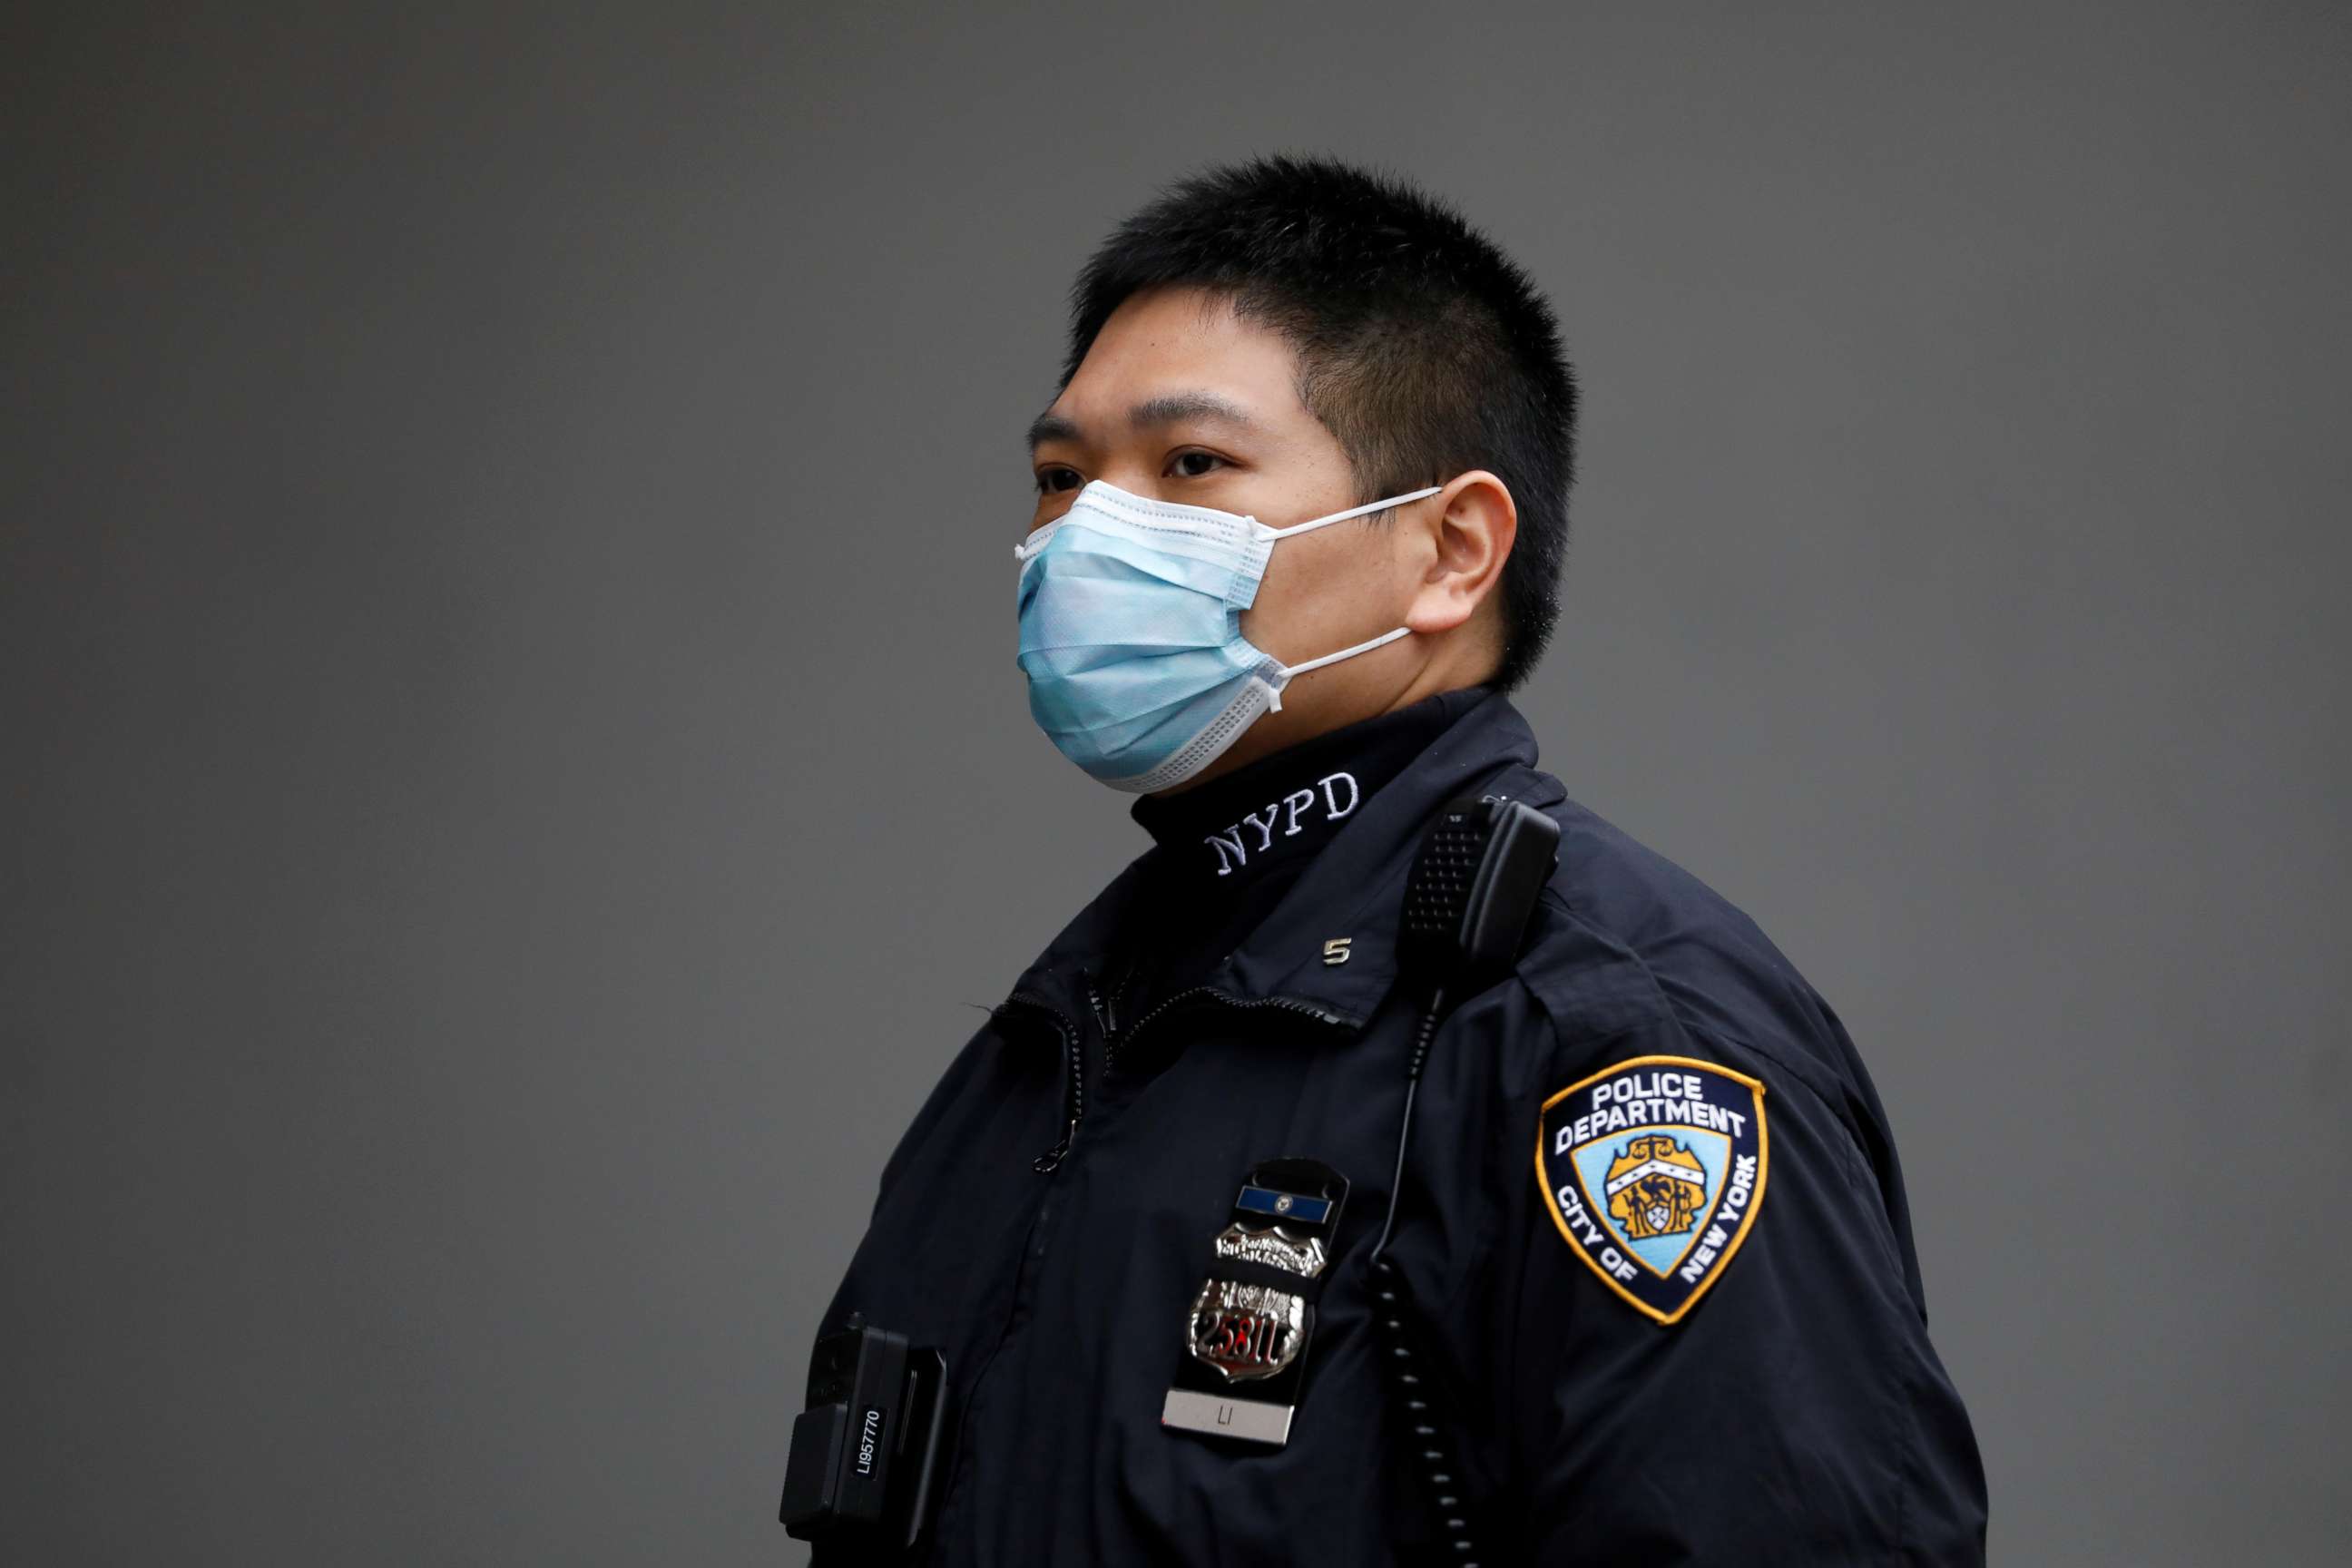 PHOTO: A New York Police Department officer is seen in a protective mask during the coronavirus disease outbreak in the Manhattan borough of New York, March 20, 2020.